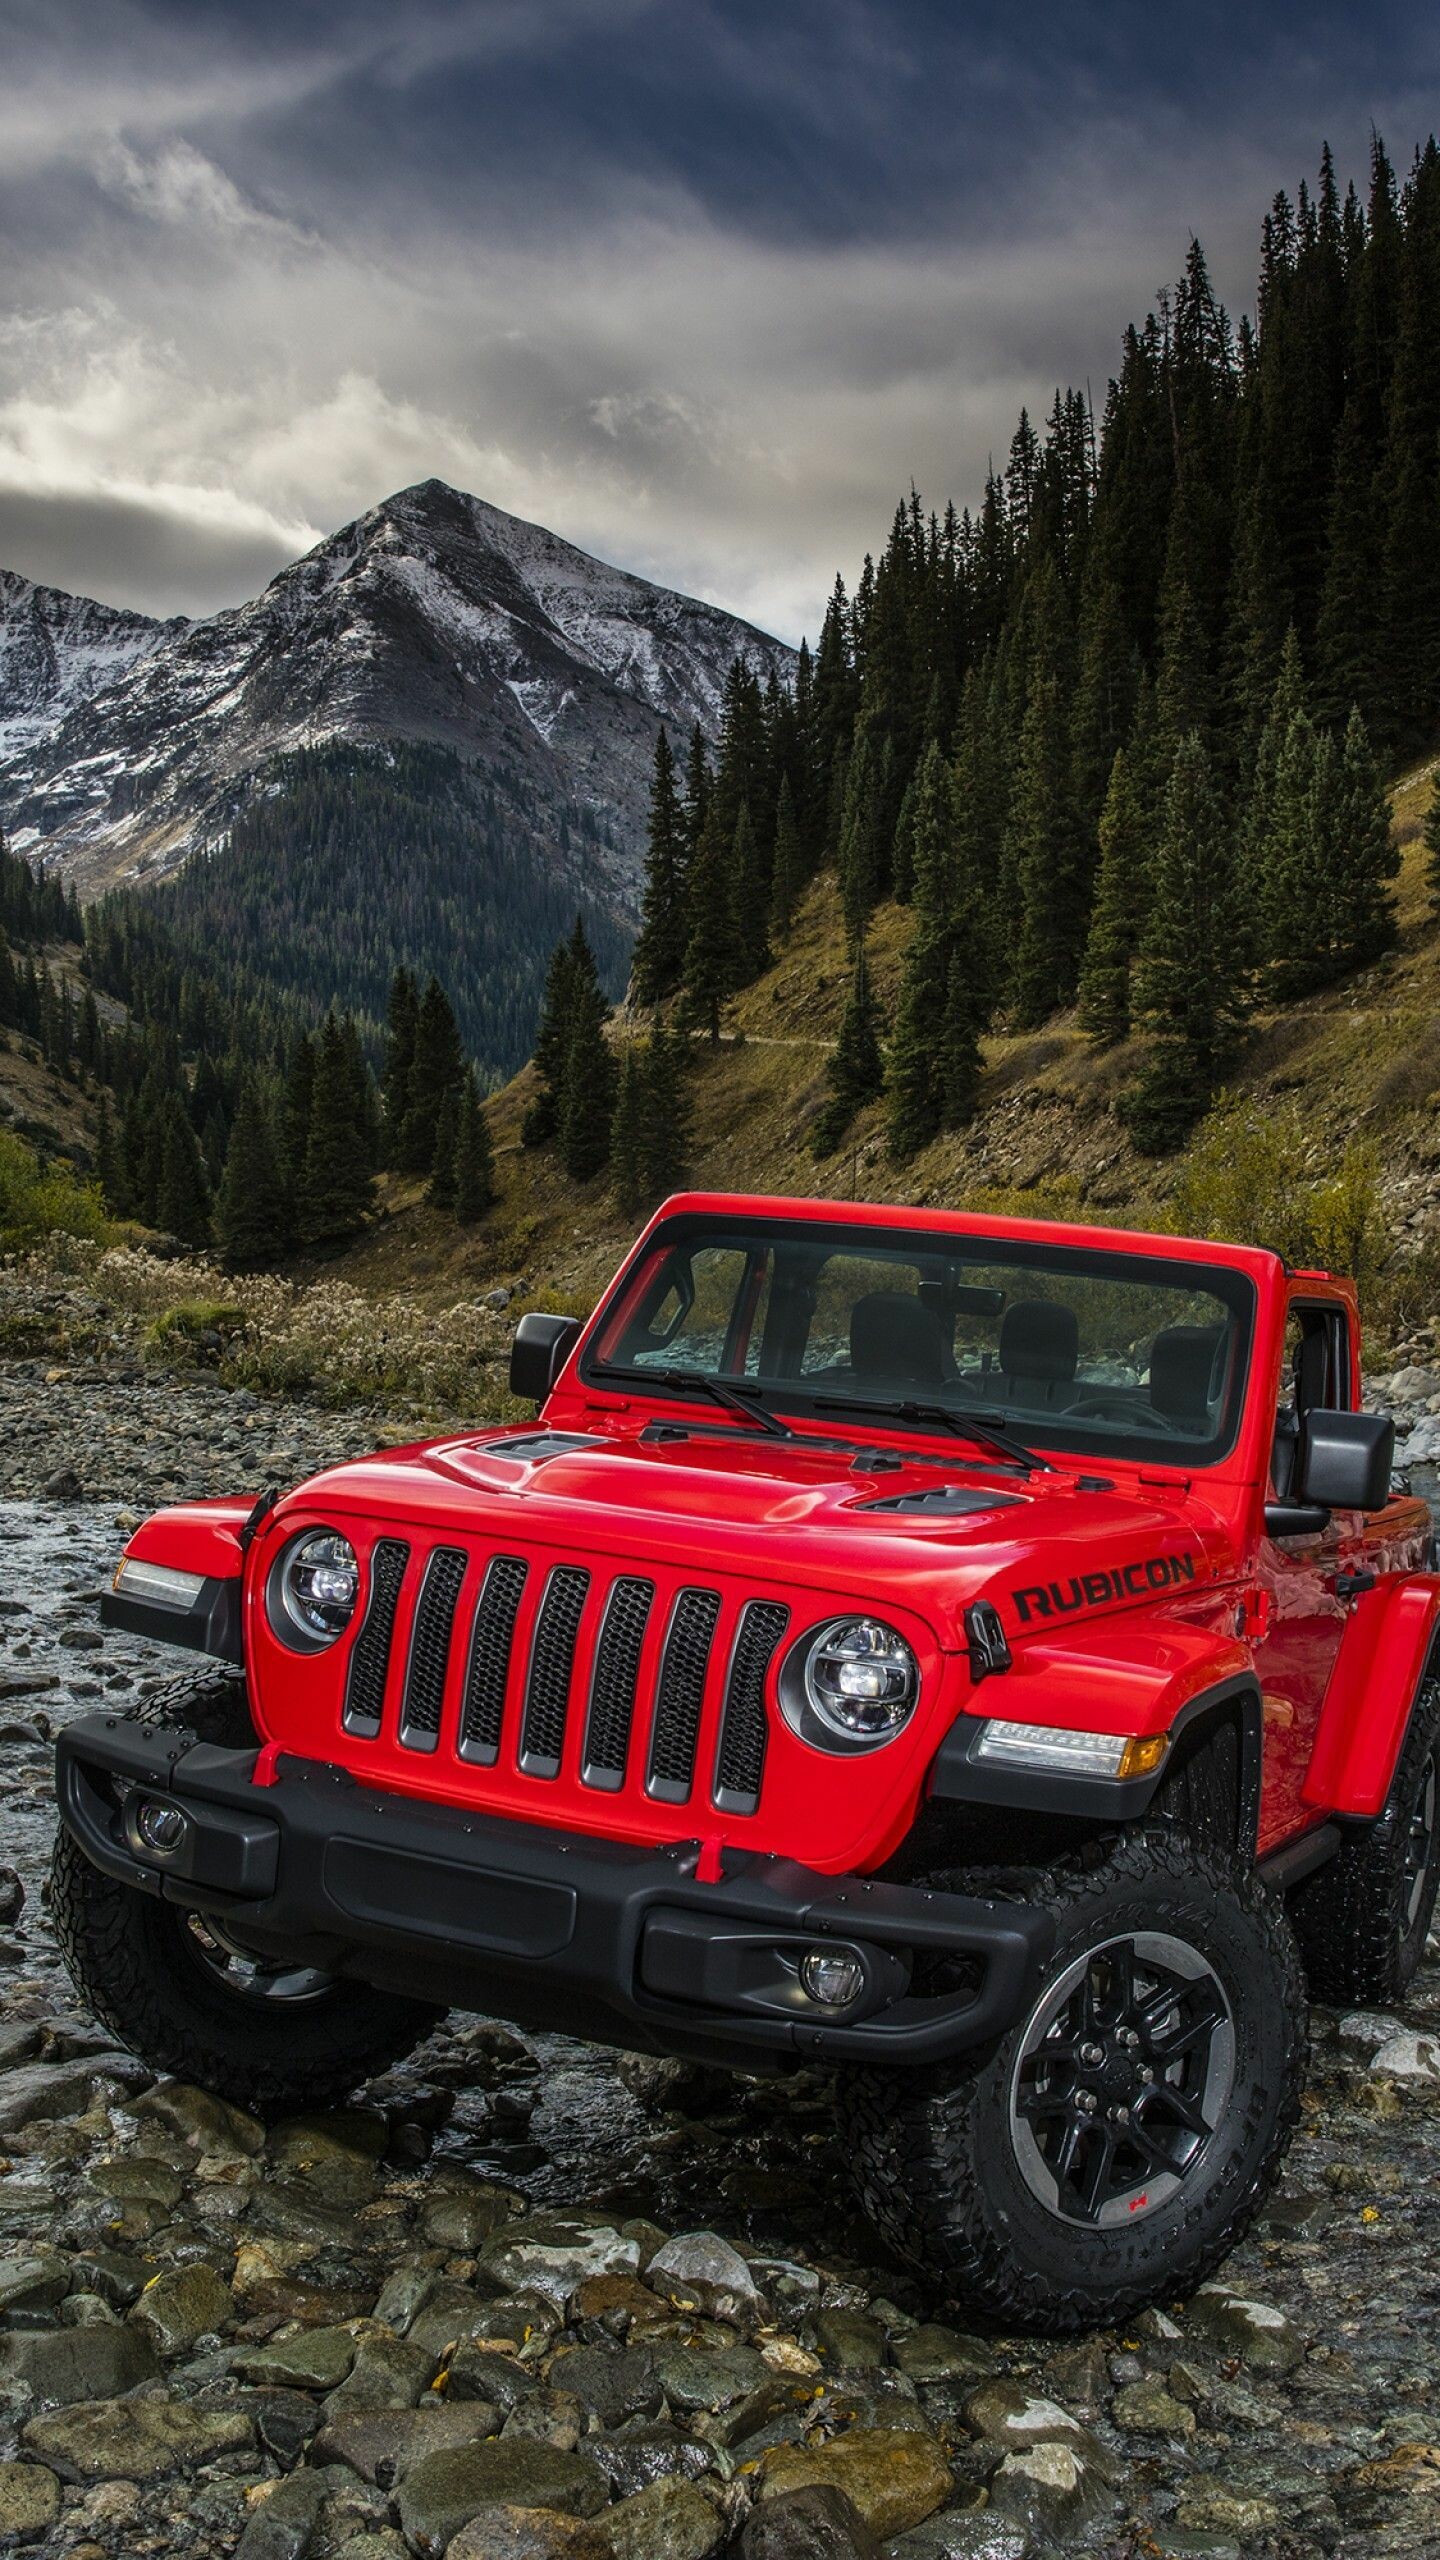 Jeep: The upgraded Rubicon model of the JK Wrangler is equipped with electronically activated locking differentials, Dana 44 axles front and rear with 4.10 gears, a 4:1 transfer case, an electronic sway bar disconnect, and heavy-duty suspension. 1440x2560 HD Background.